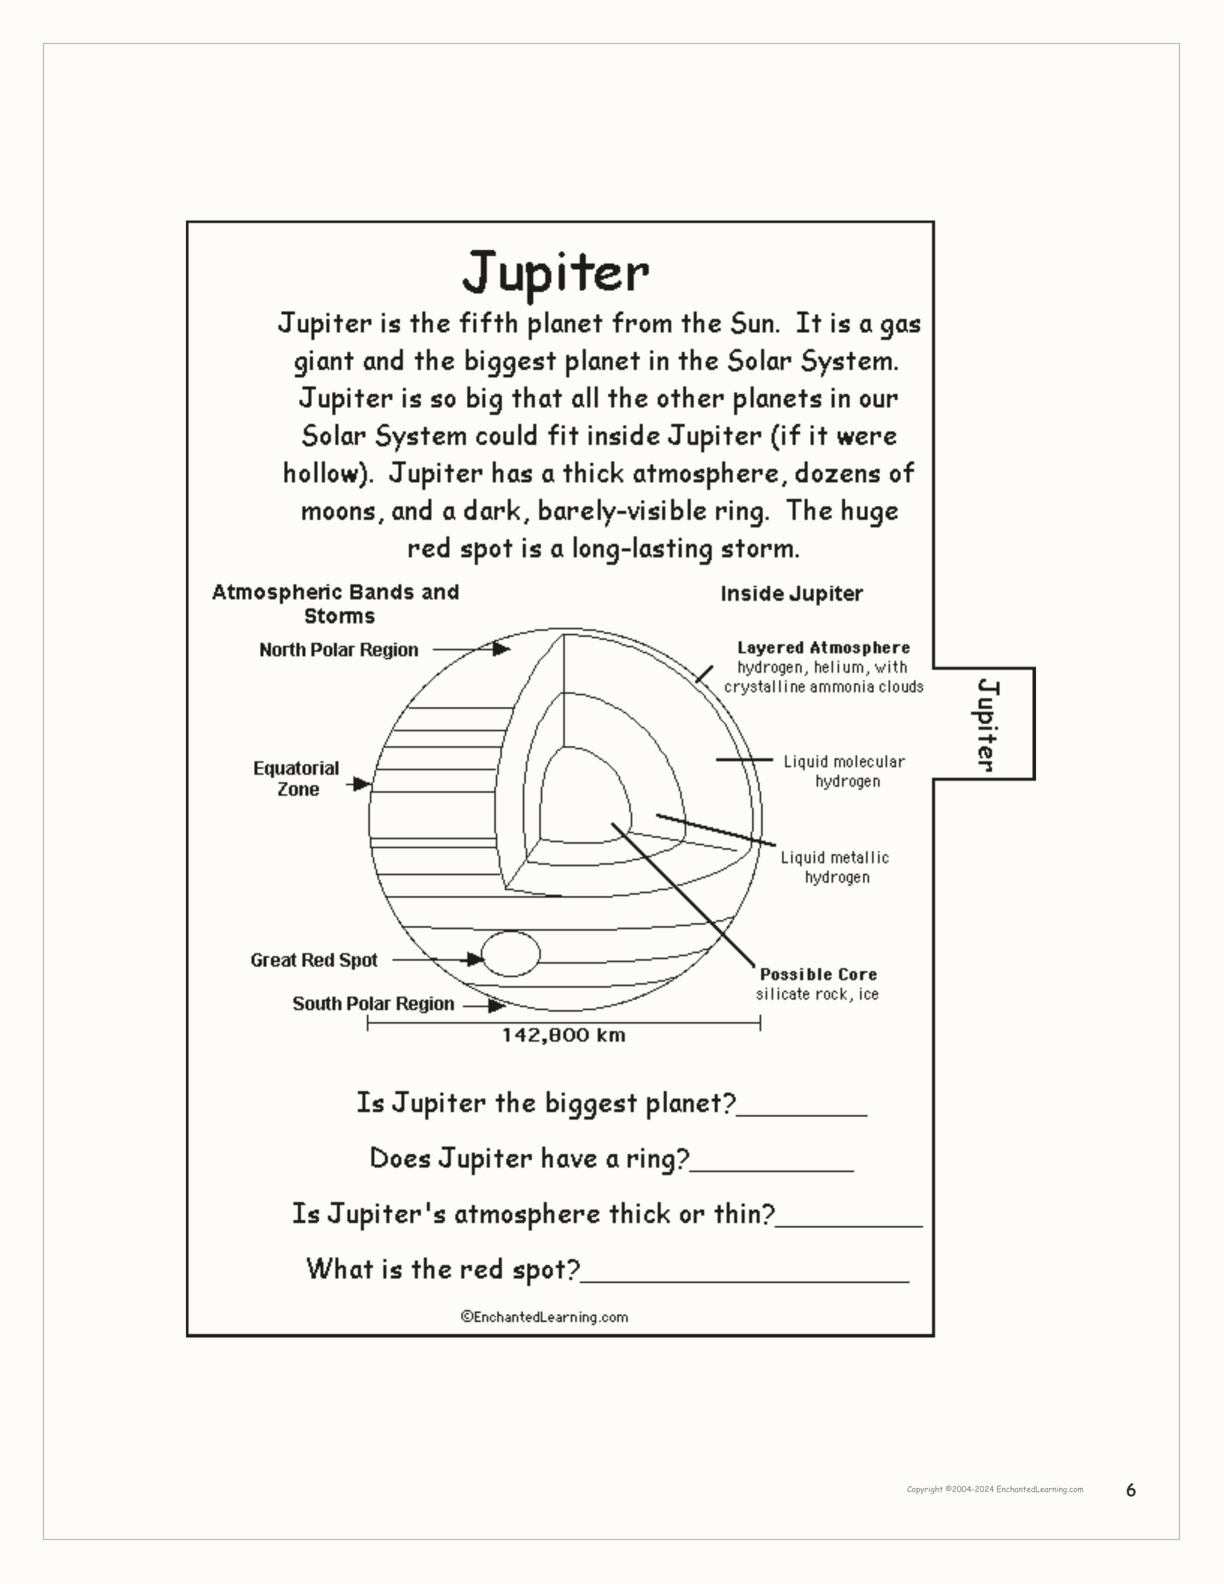 The Planets of our Solar System Book interactive printout page 6